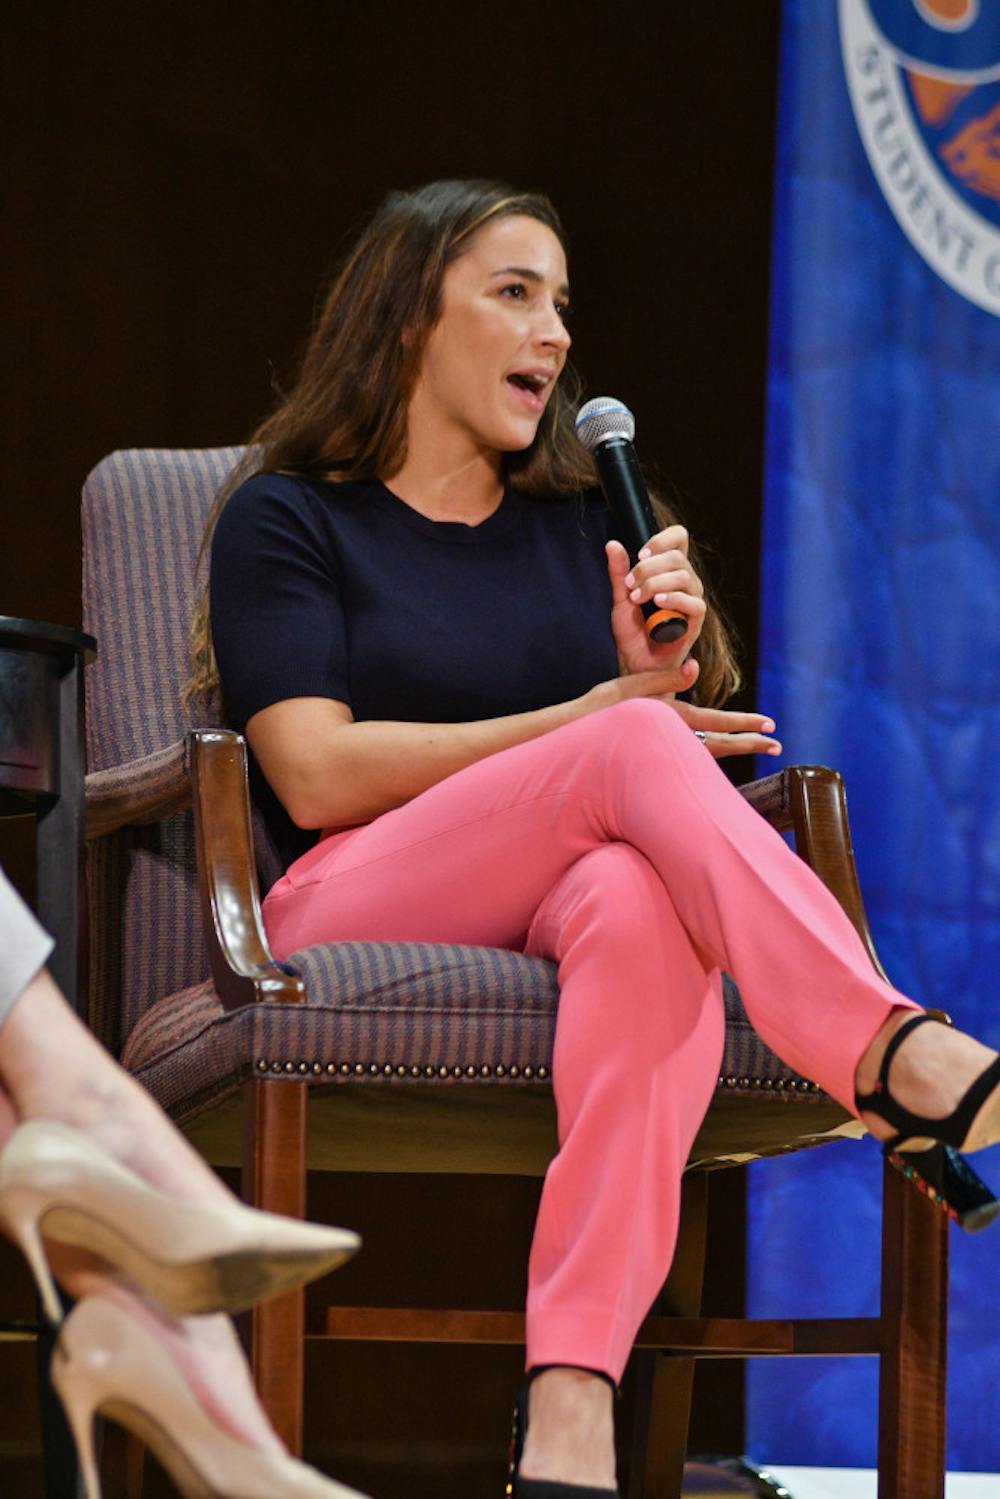 <p><span>Aly Raisman, team captain of the gold medal-winning USA gymnastics team in 2012 and 2016, speaks Tuesday night at the University Auditorium. Raisman talked about her dream of becoming an Olympian and her training as well as the letter she wrote and read to her abuser Larry Nassar. </span></p><p><span> </span></p>